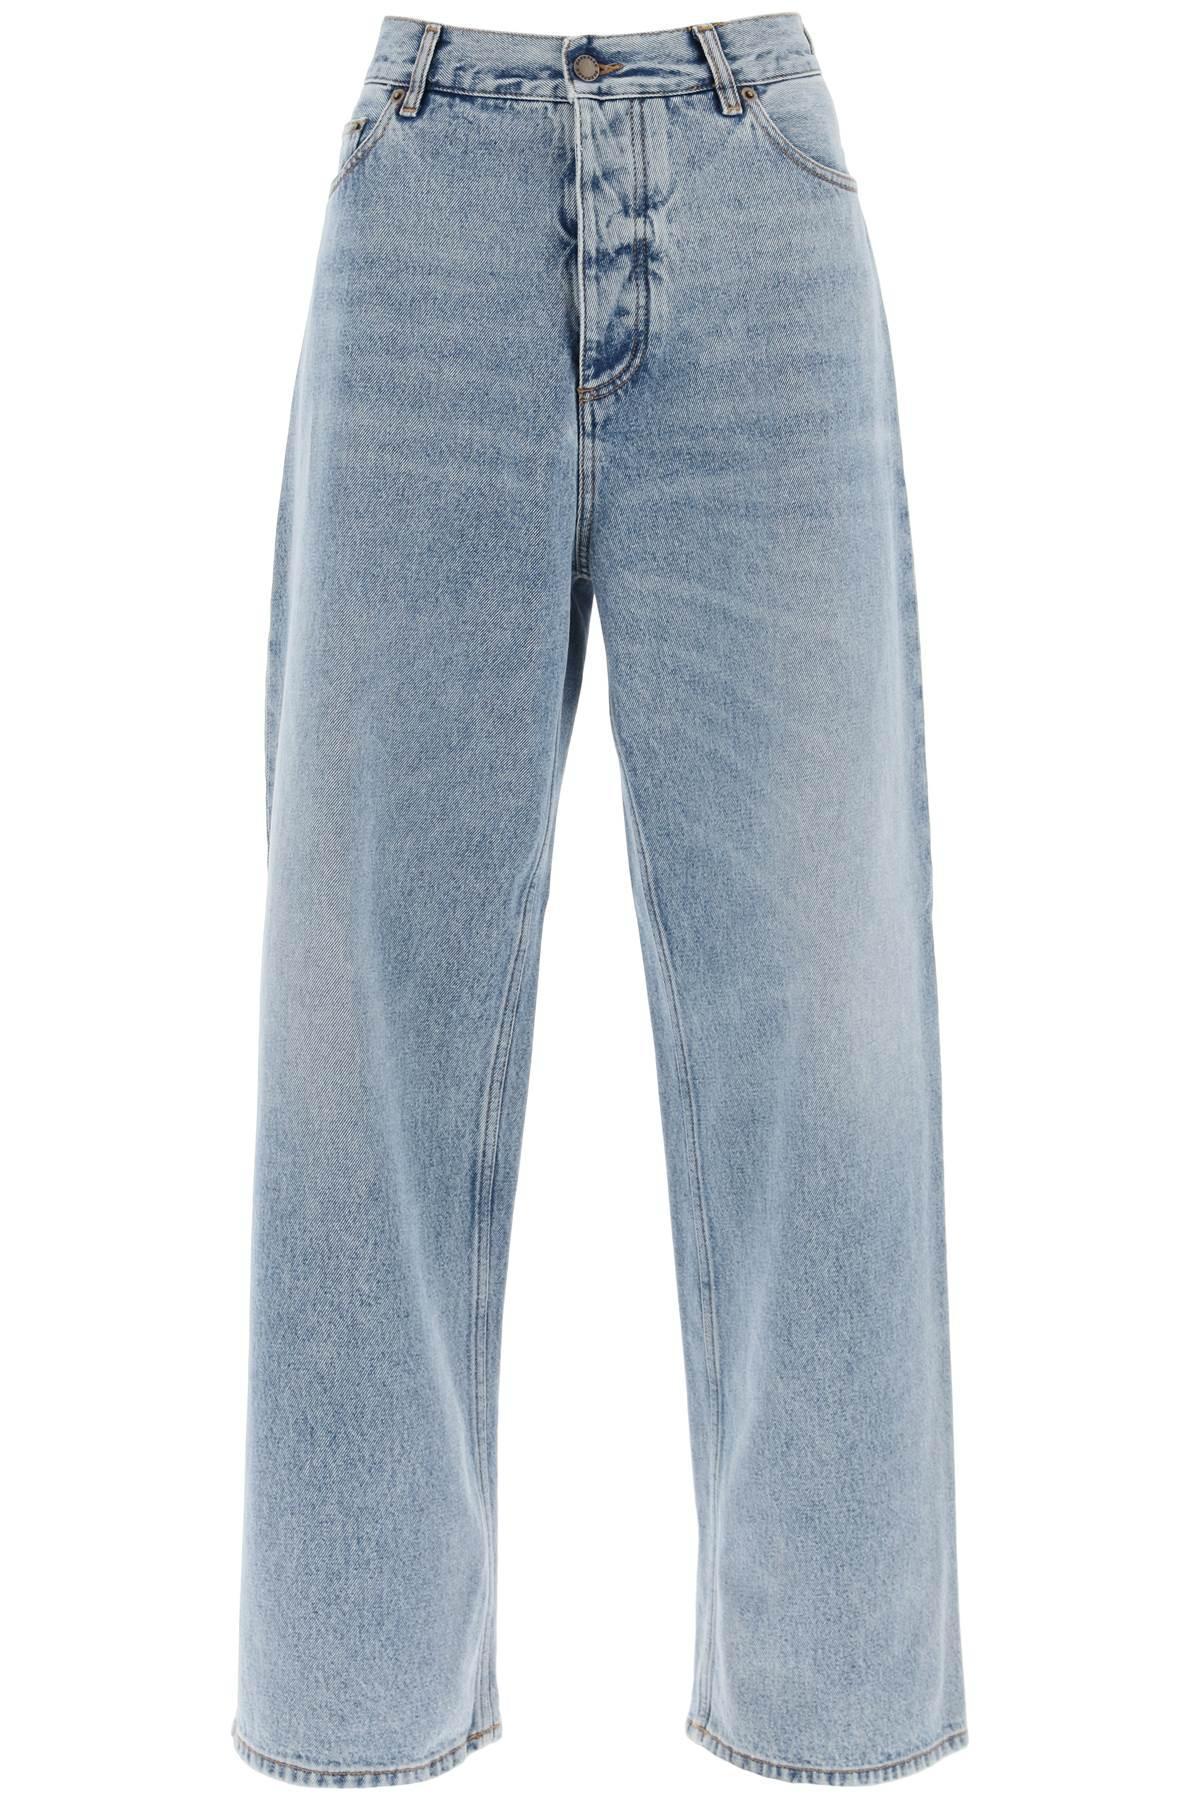 DARKPARK 'lady Ray' Flared Jeans in Blue | Lyst